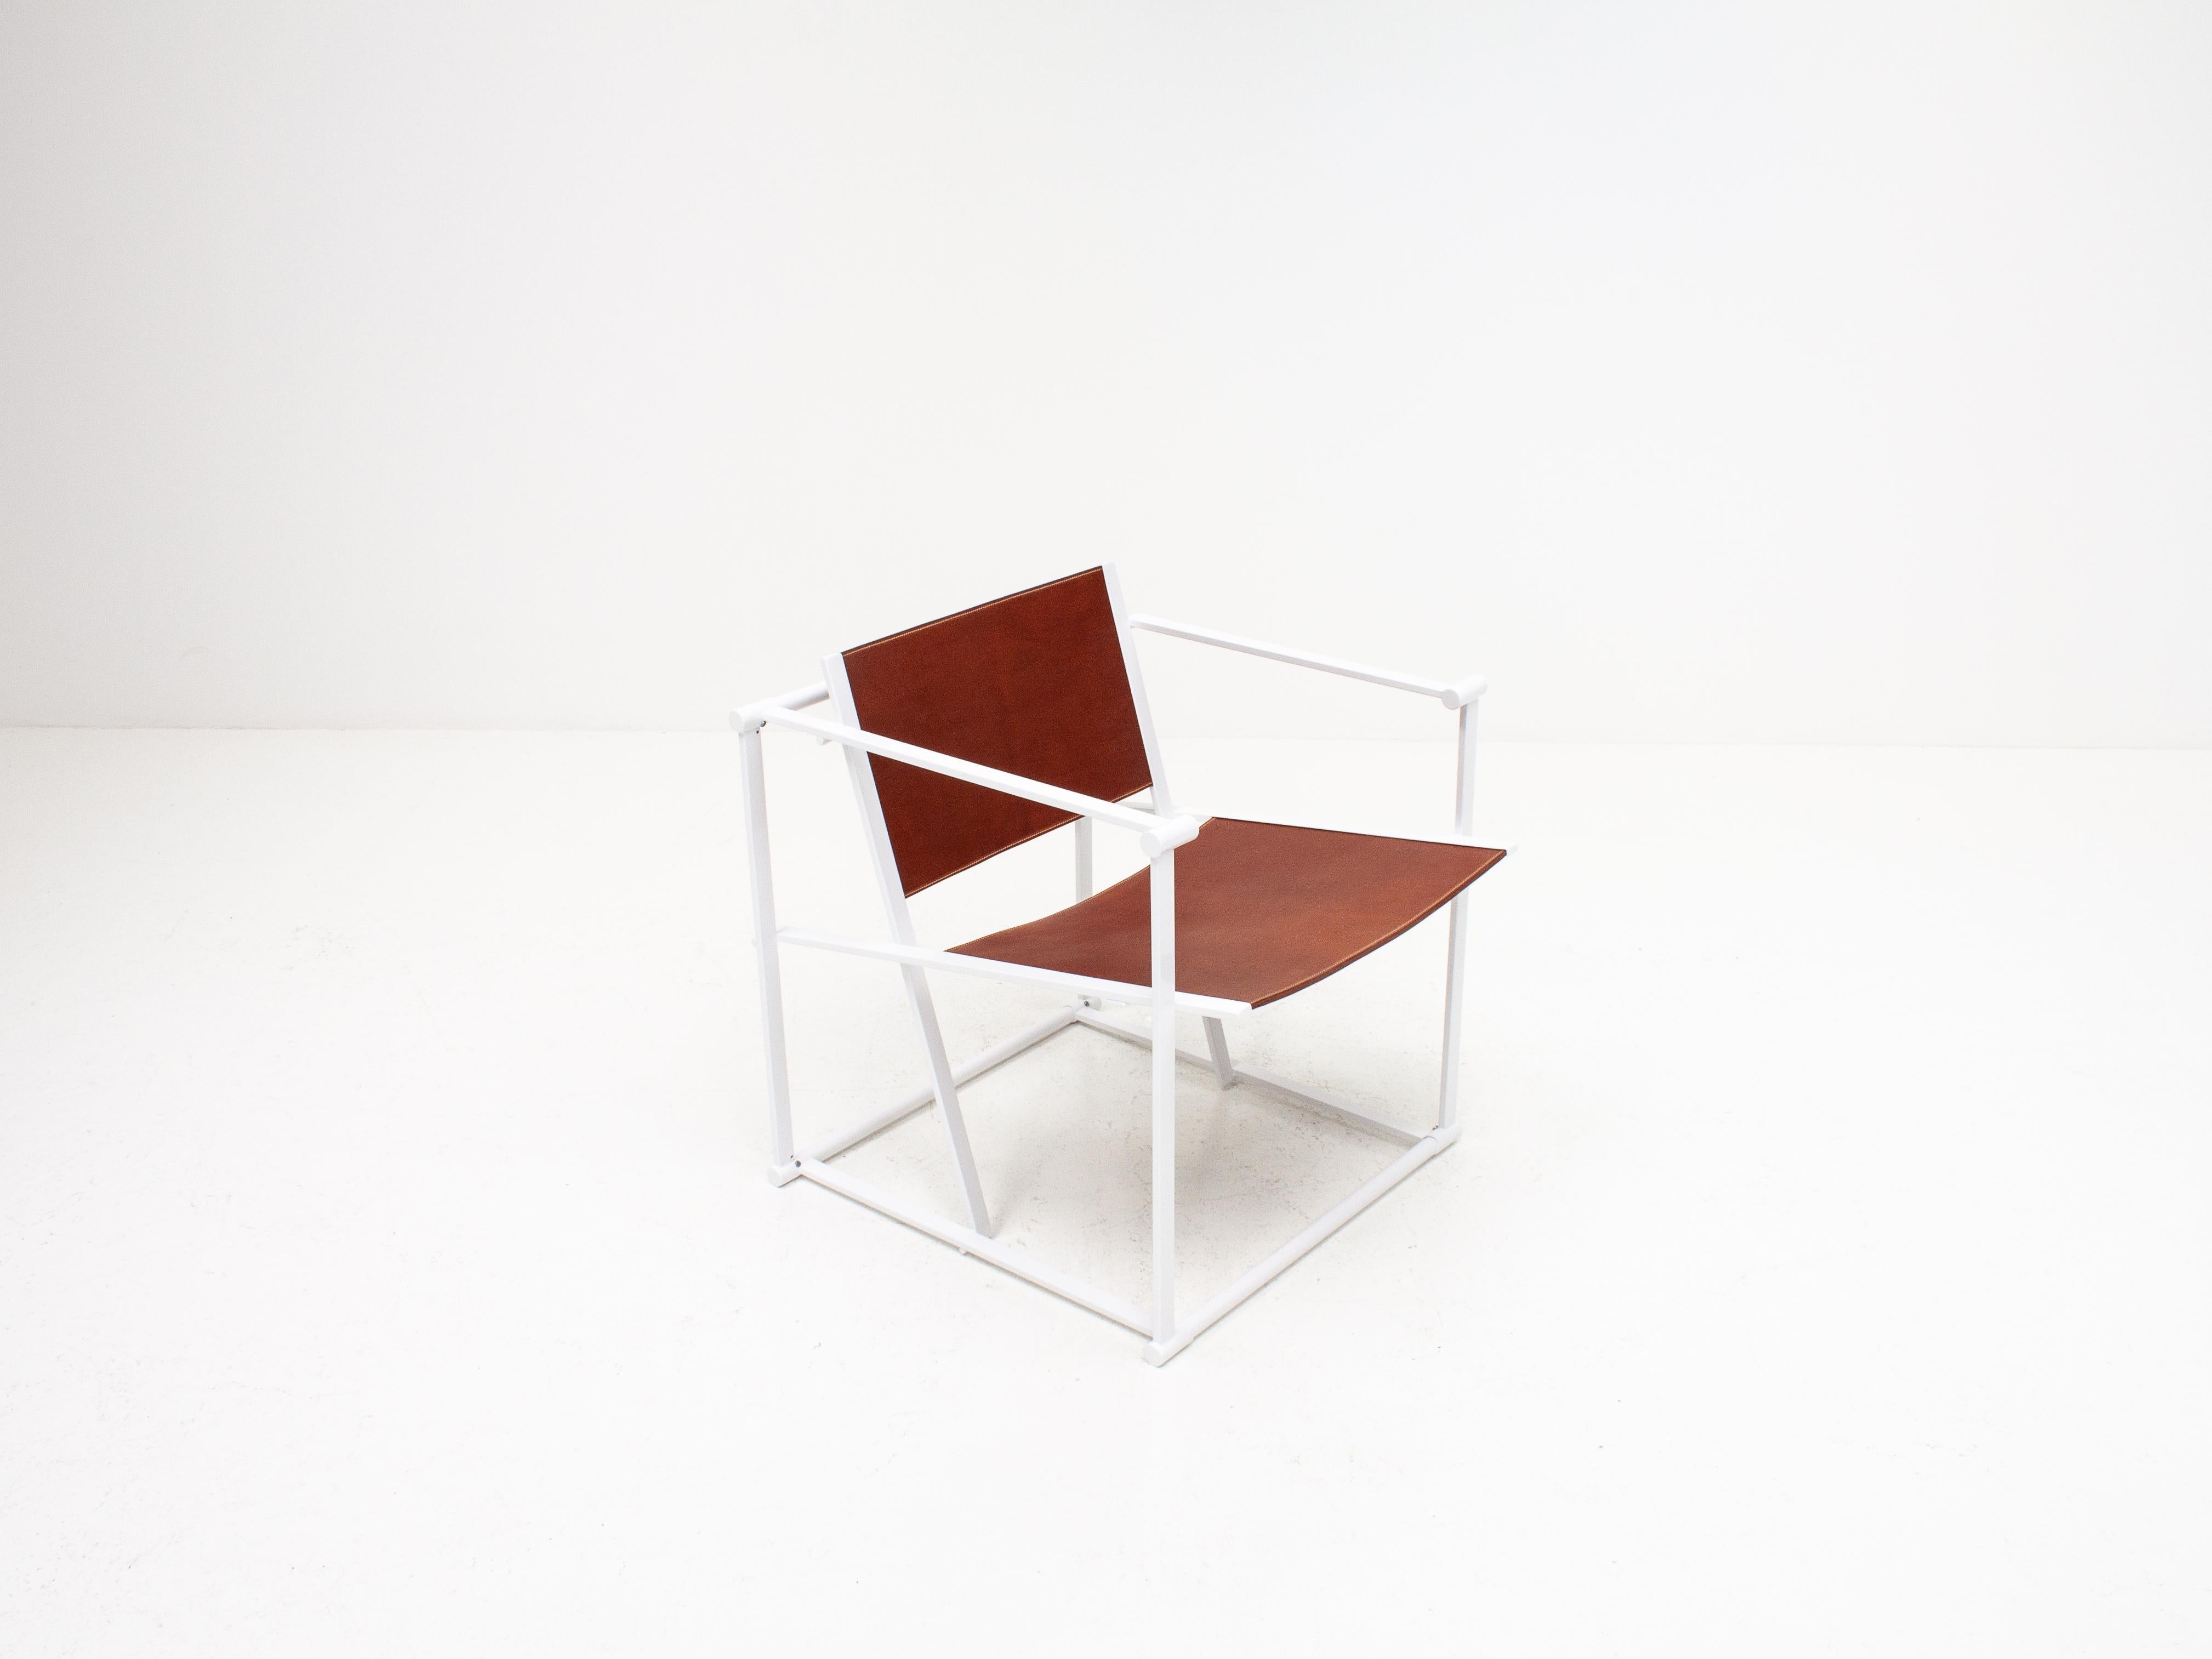 A steel and leather FM62 chair by Radboud Van Beekum for Pastoe, 1980s.

Constructed from geometrically folded steel with leather seating. Inspired by the designs of Gerrit Rietveld and following the traditions of the De Stijl movement the cube